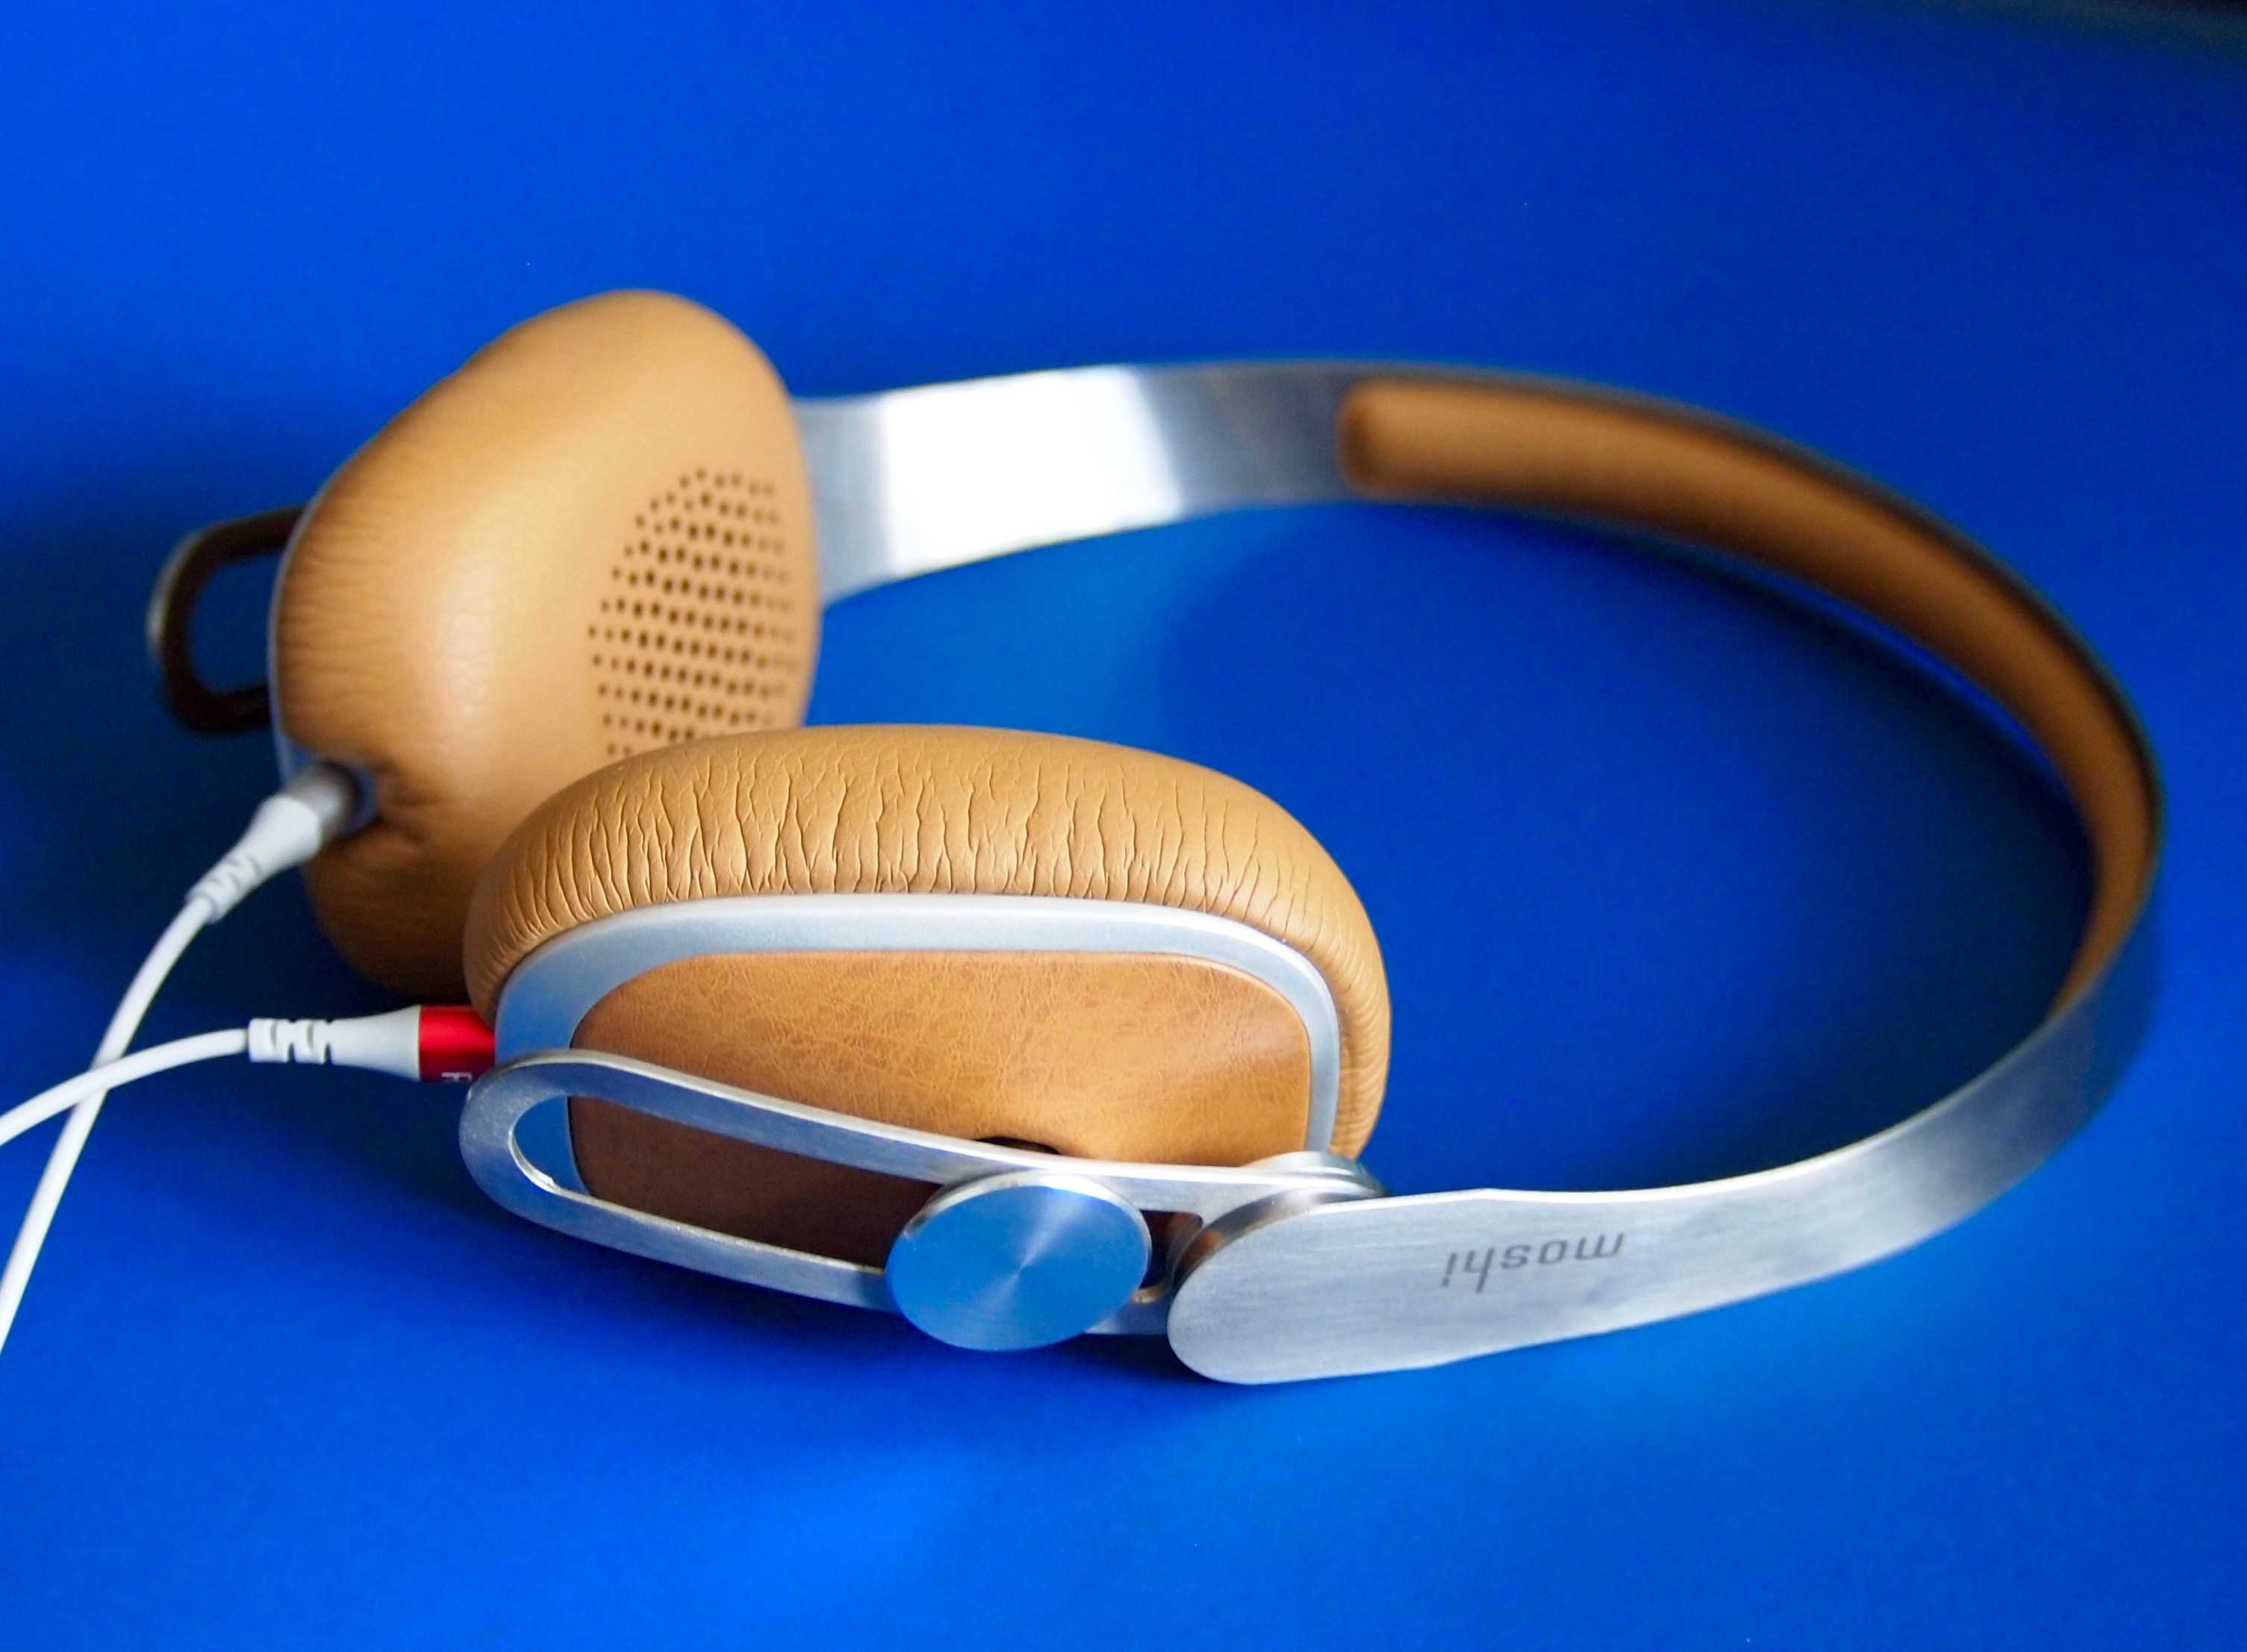 Moshi's Avanti headphones are easy to wear and easy to carry. They sound [pretty great too.